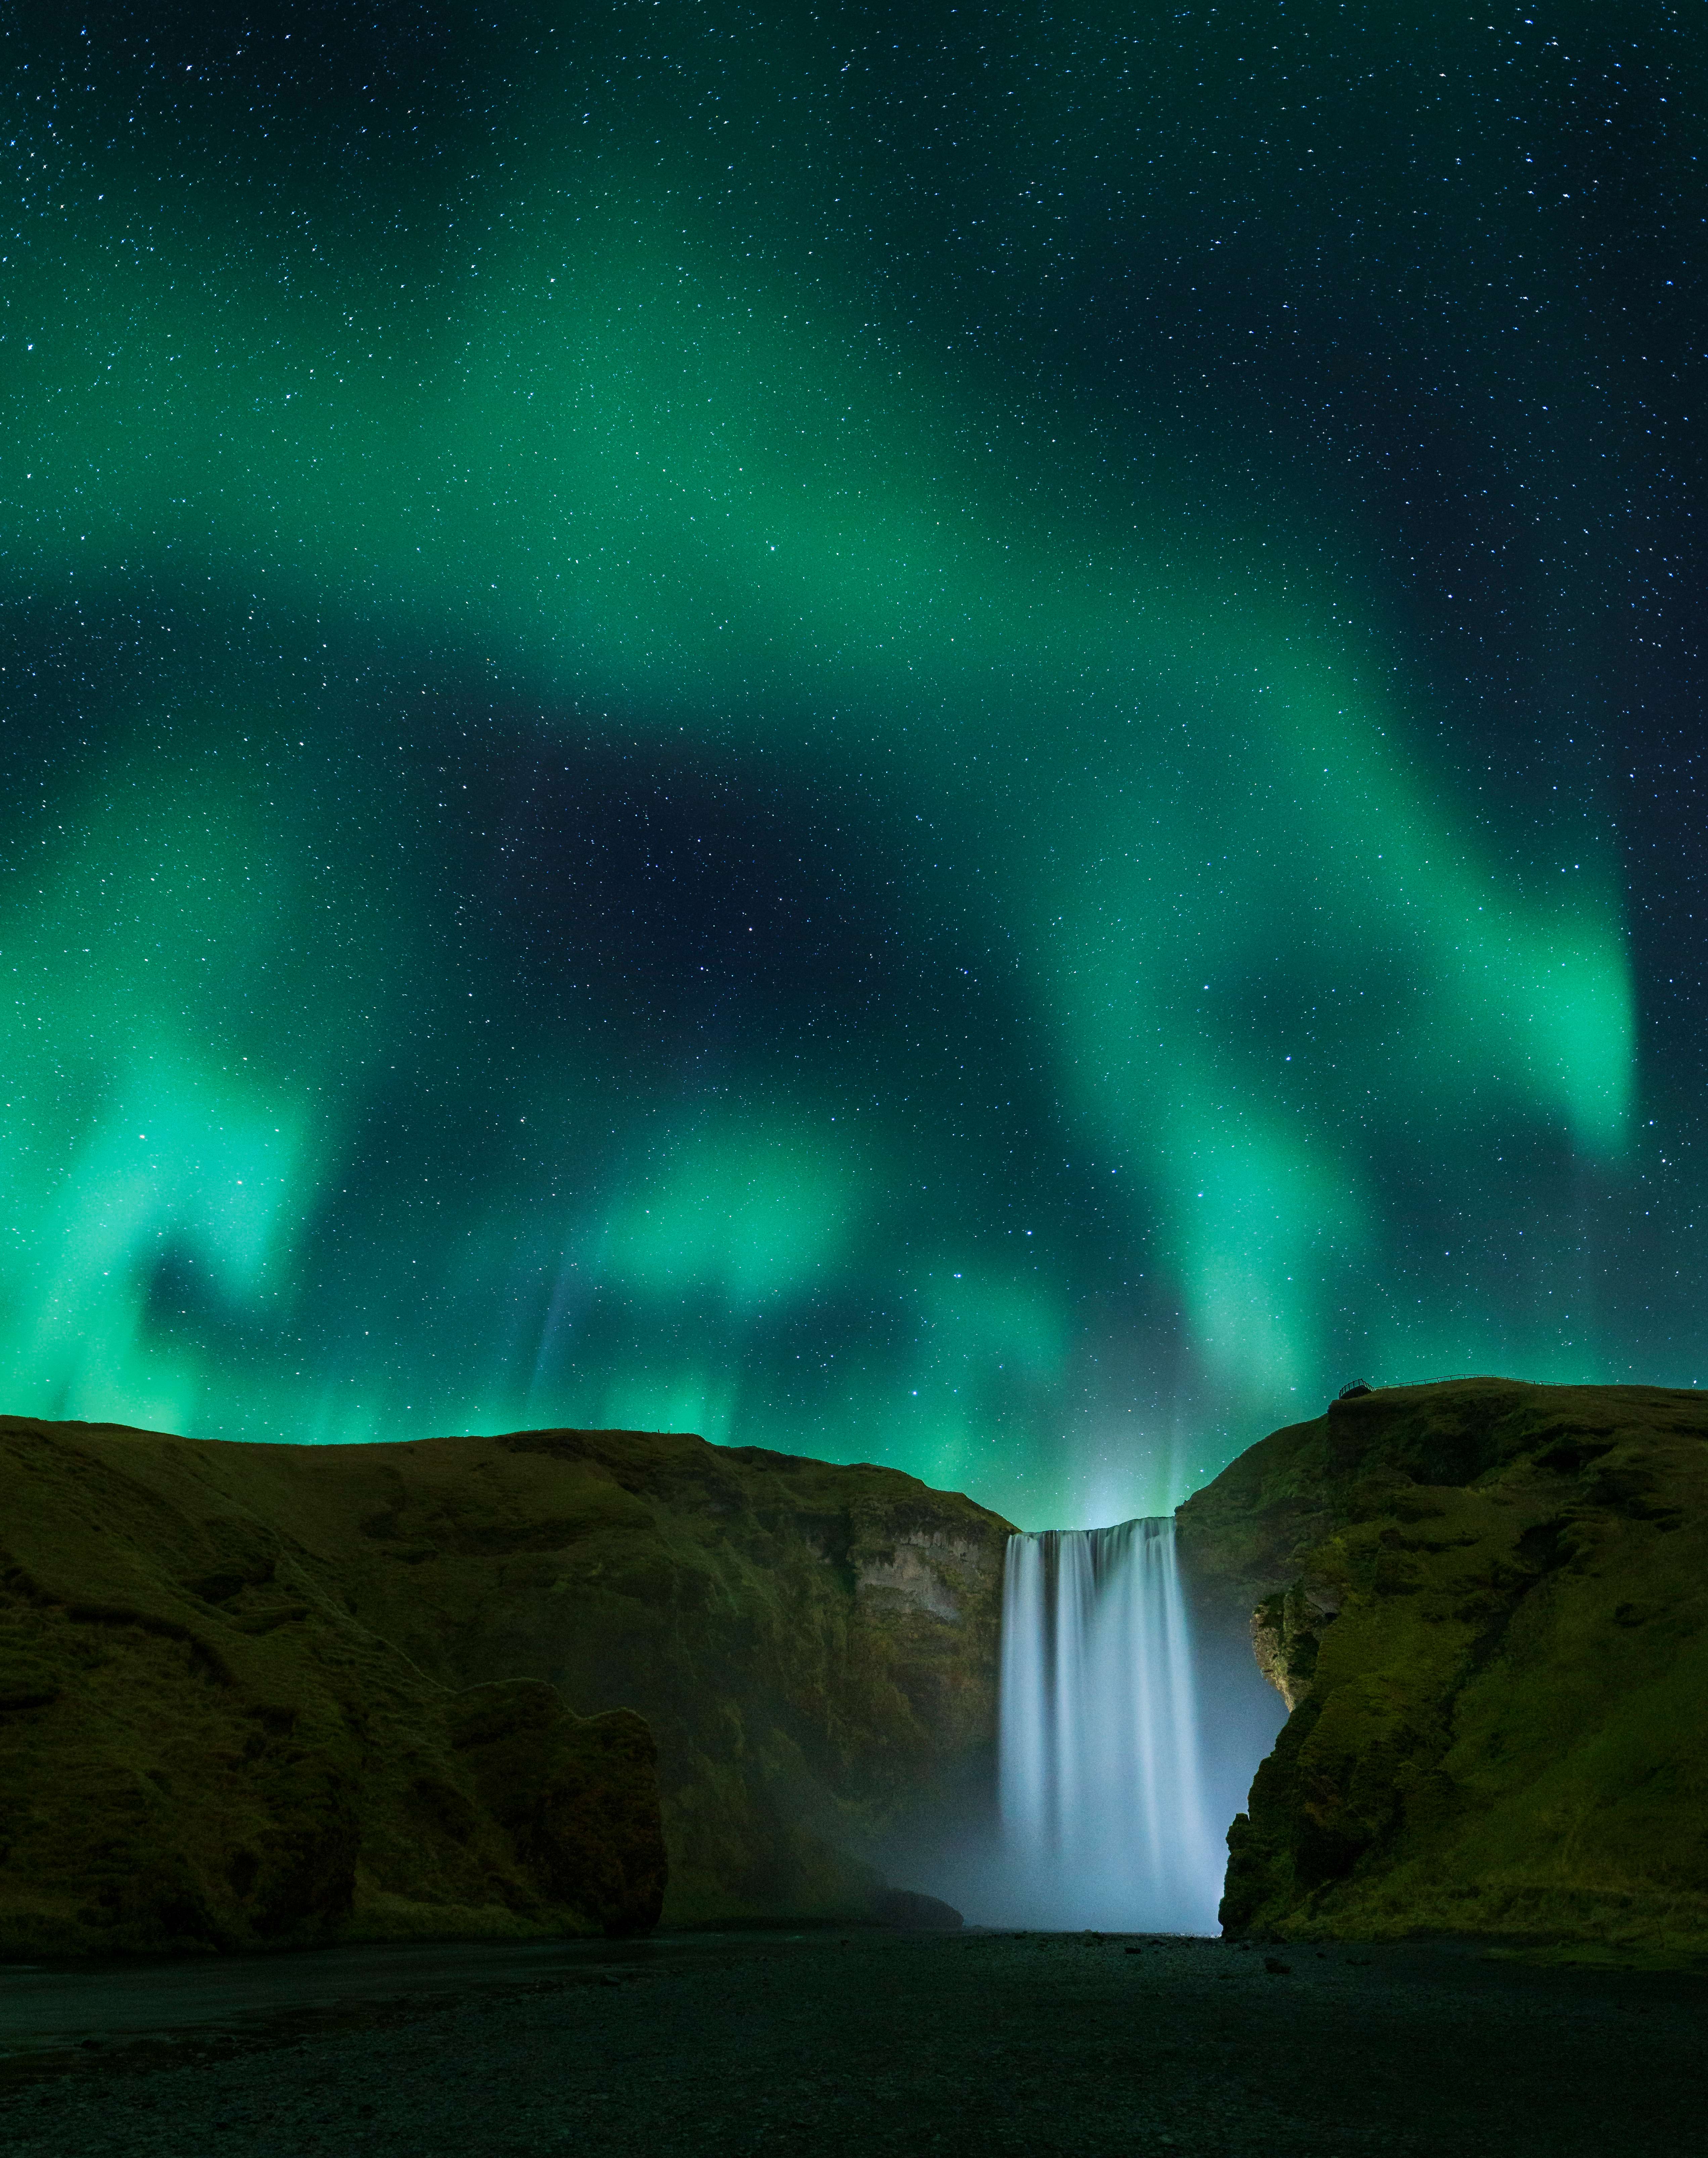 Skogasfoss Waterfall in Iceland with the Northern Lights